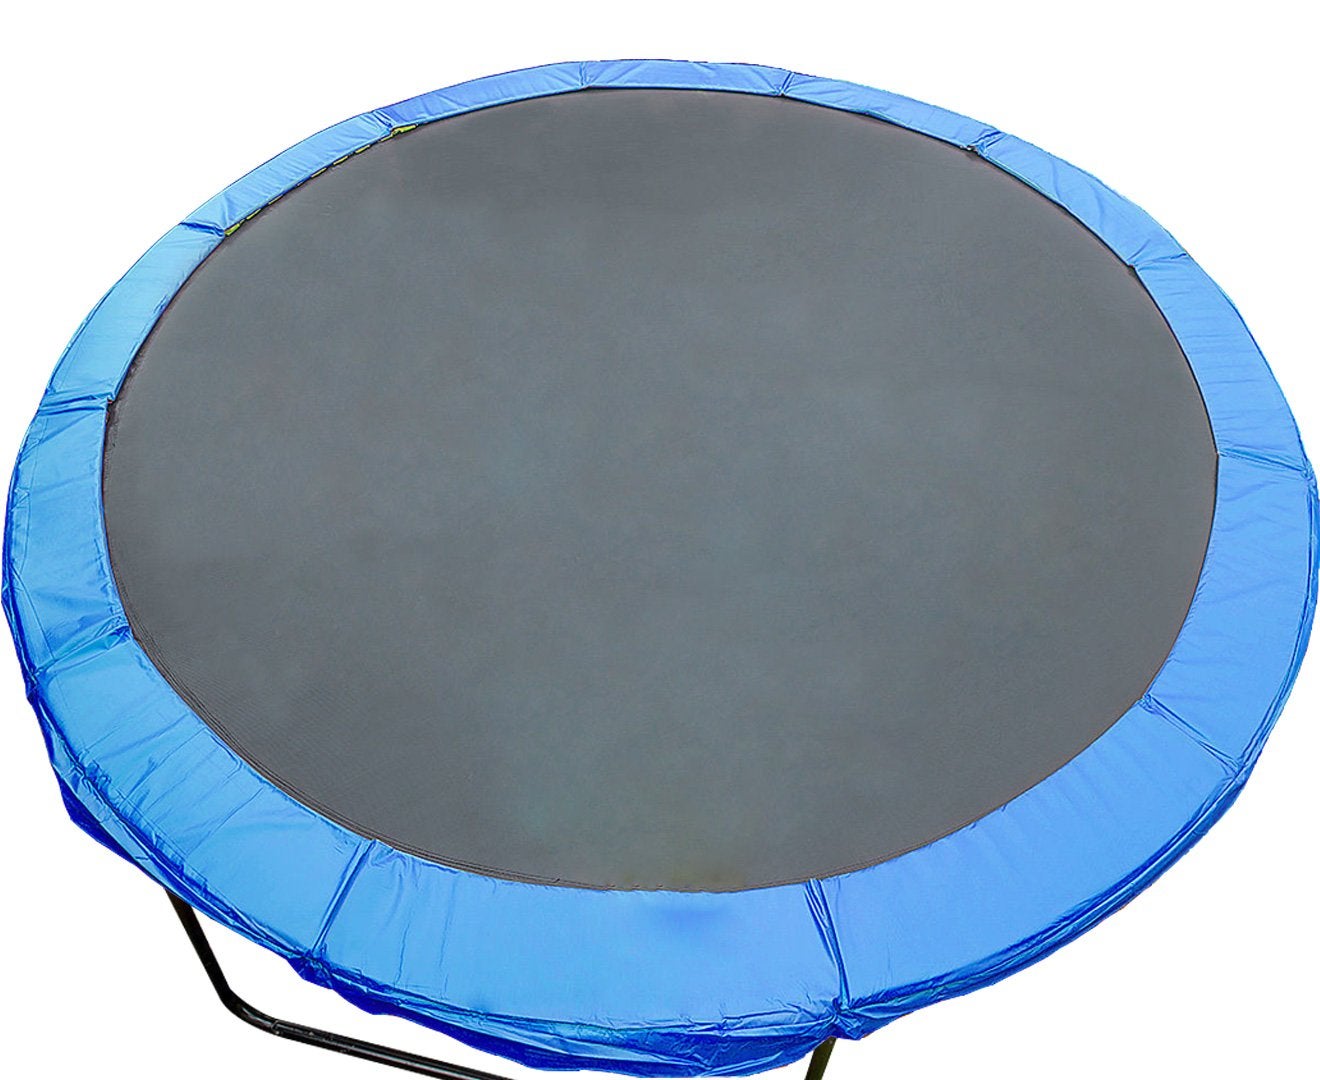 New Replacement Trampoline Safety Spring Pad Cover 14ft